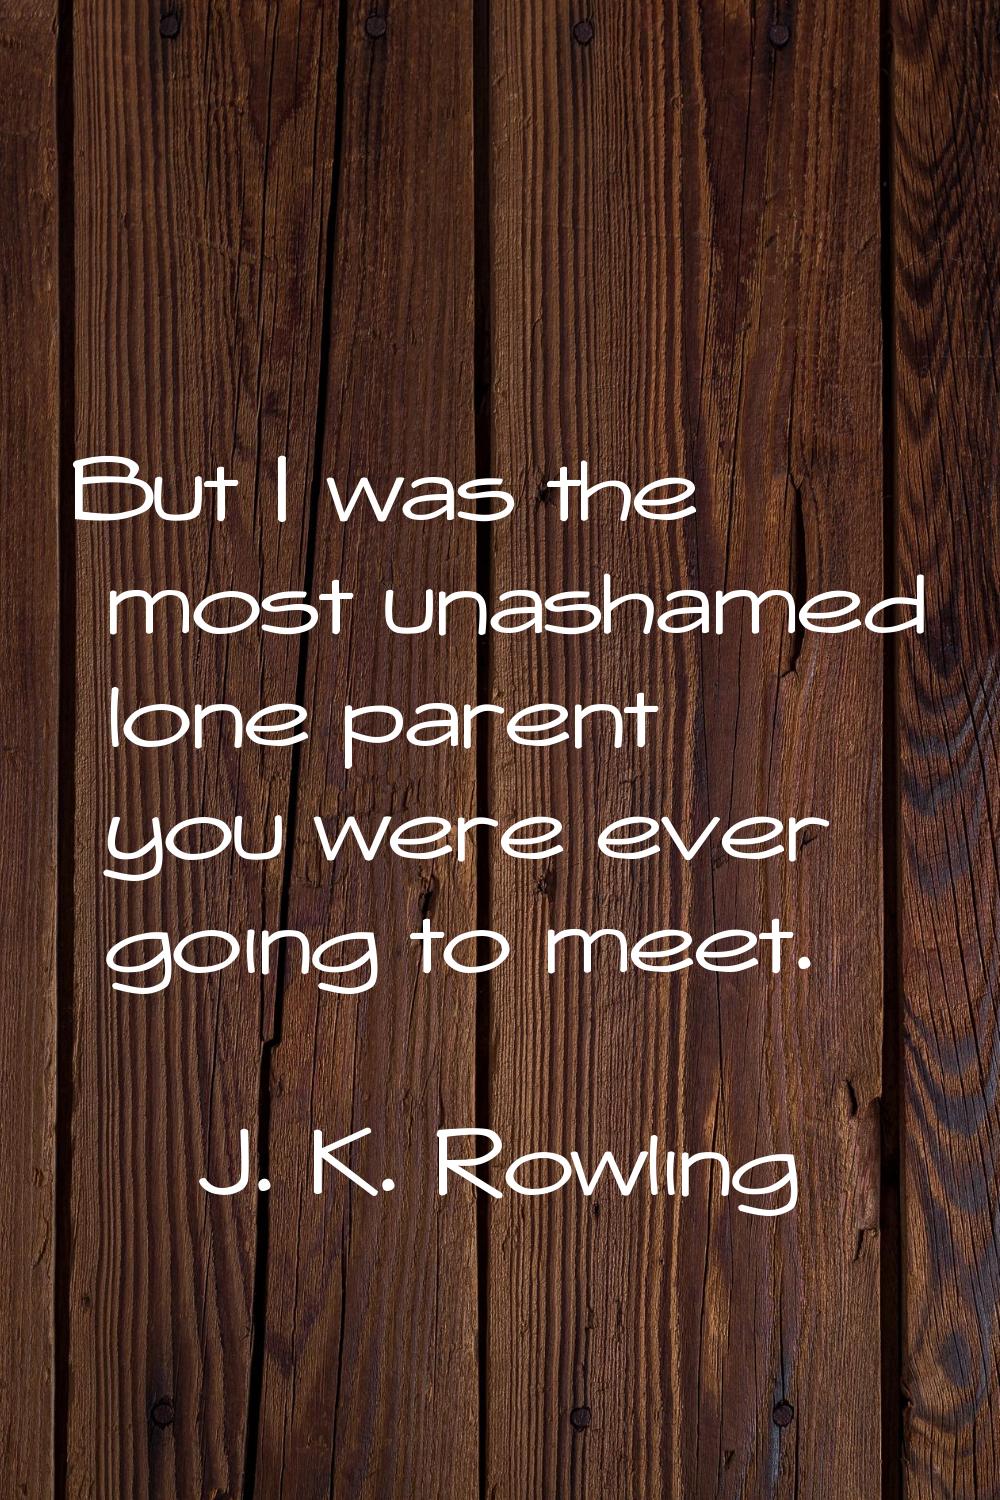 But I was the most unashamed lone parent you were ever going to meet.